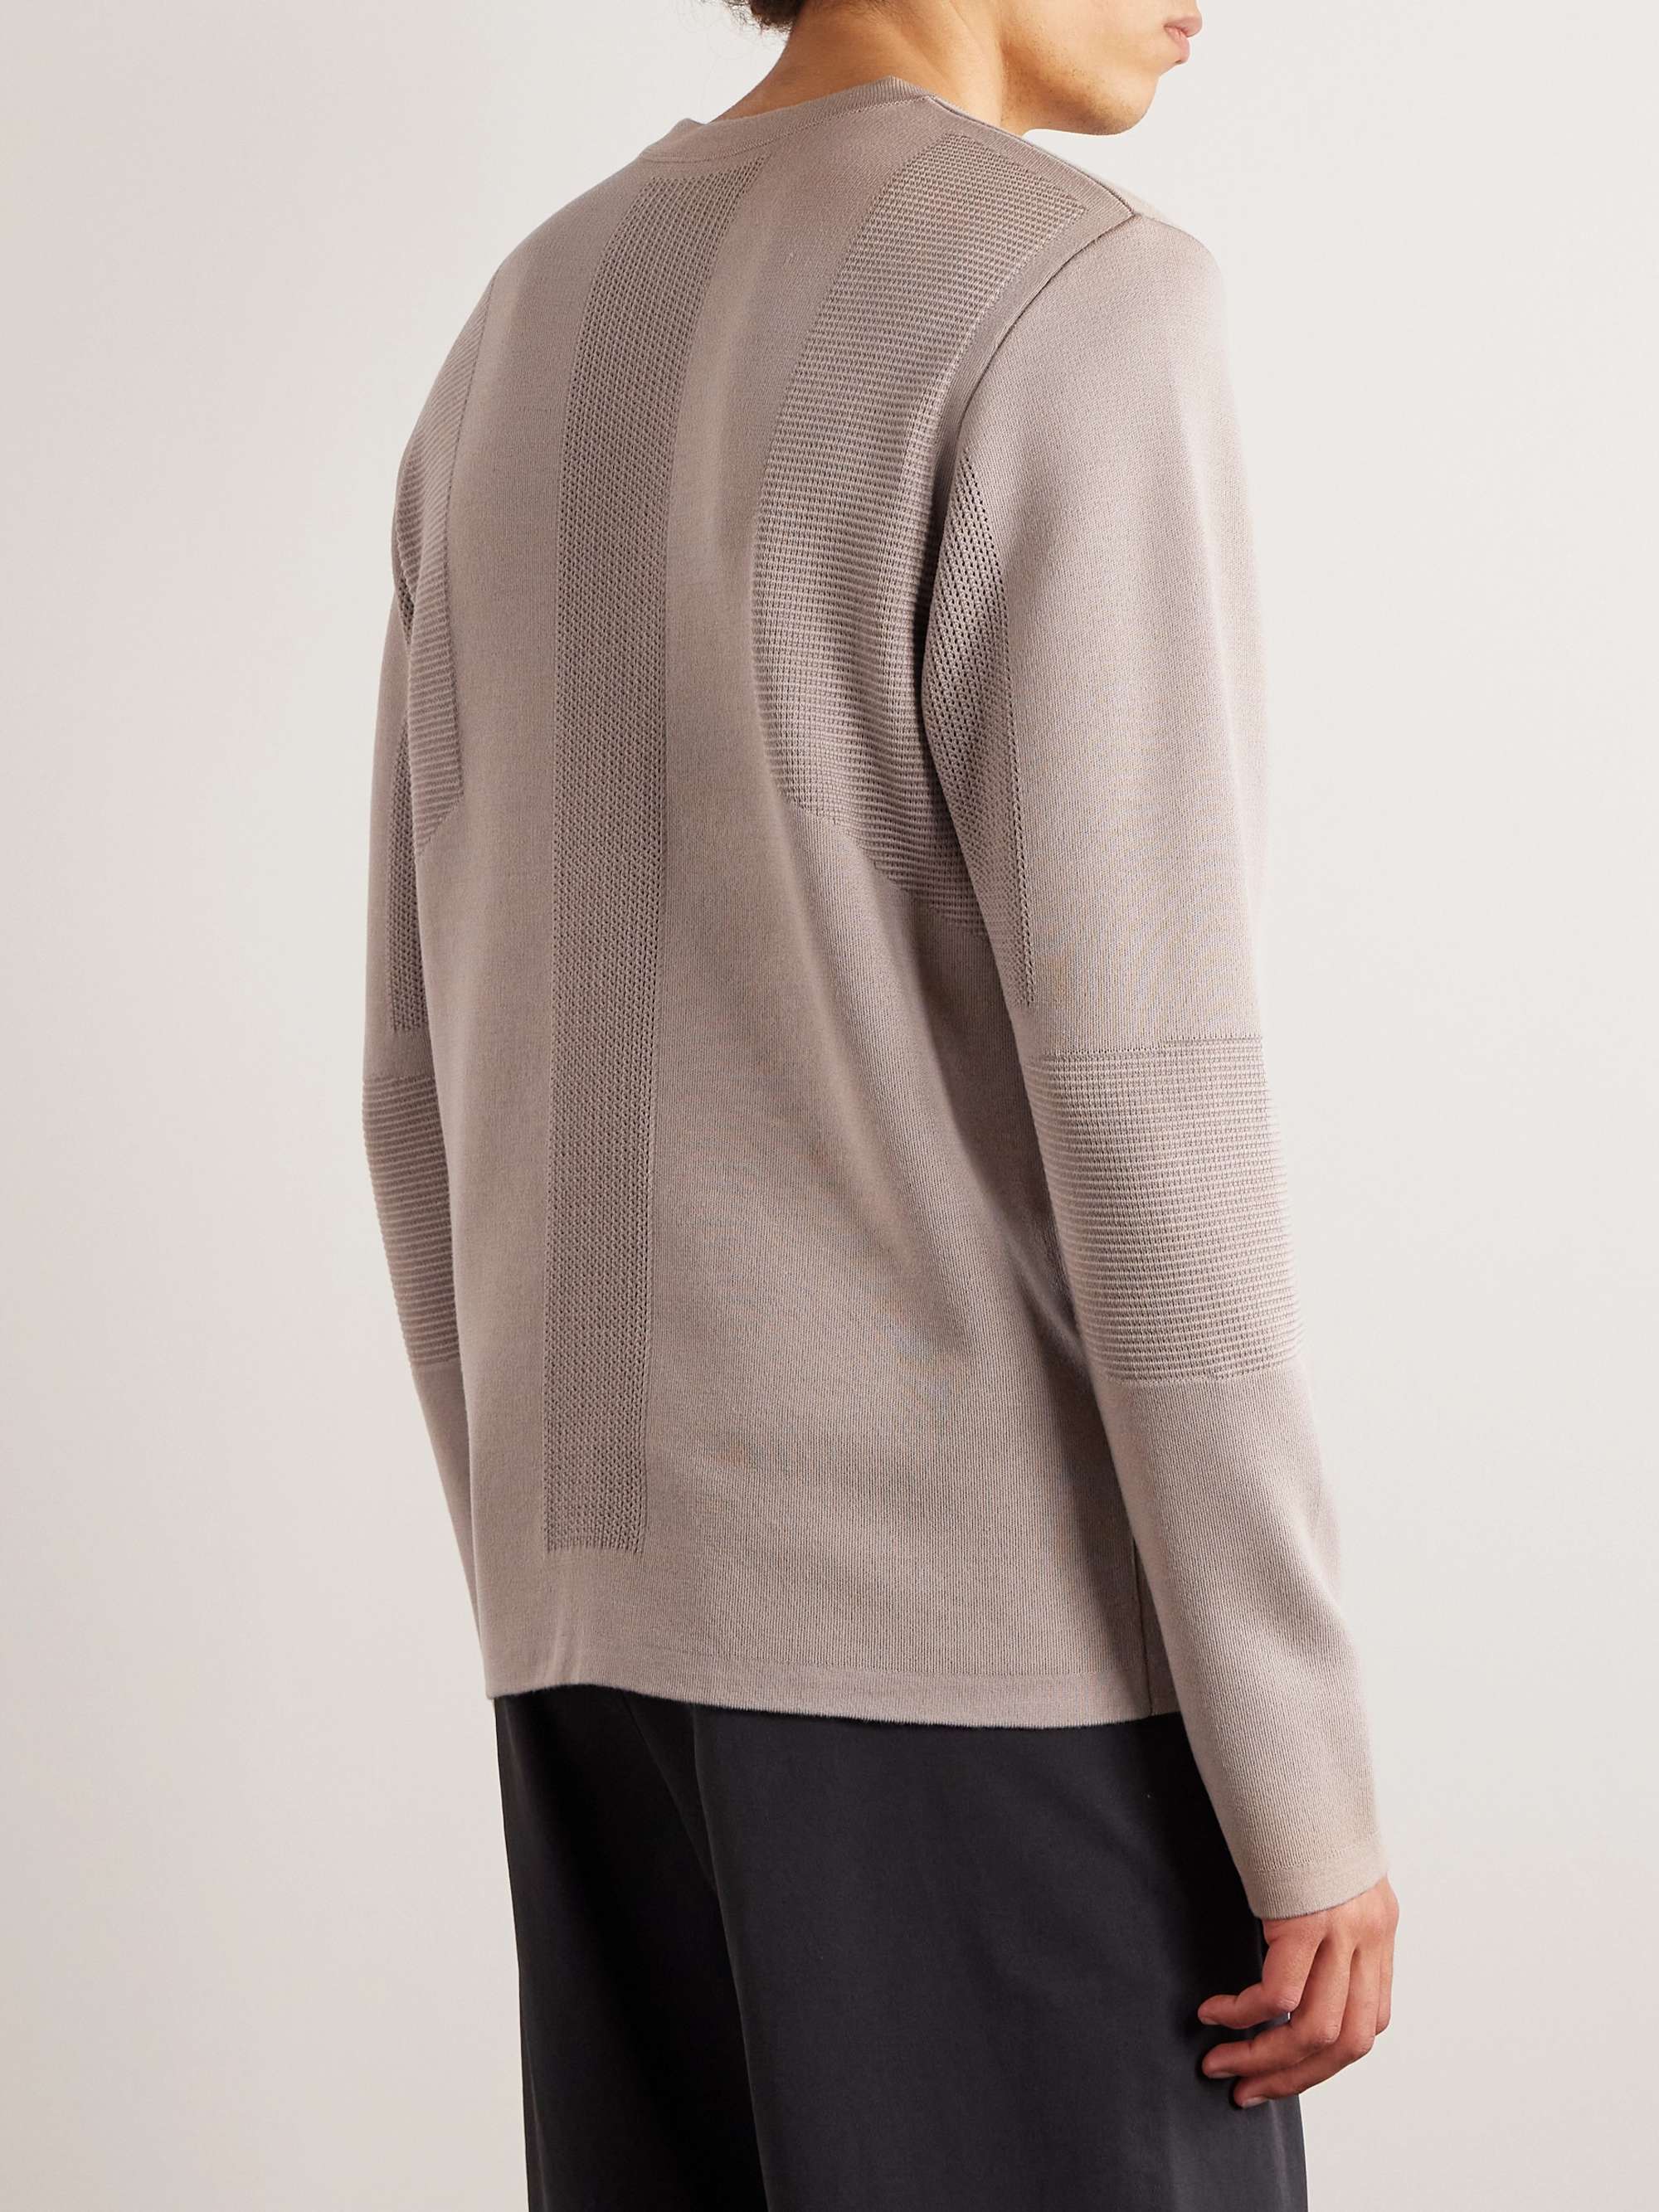 NORSE PROJECTS ARKTISK Panelled Merino Wool-Blend Sweater for Men | MR ...